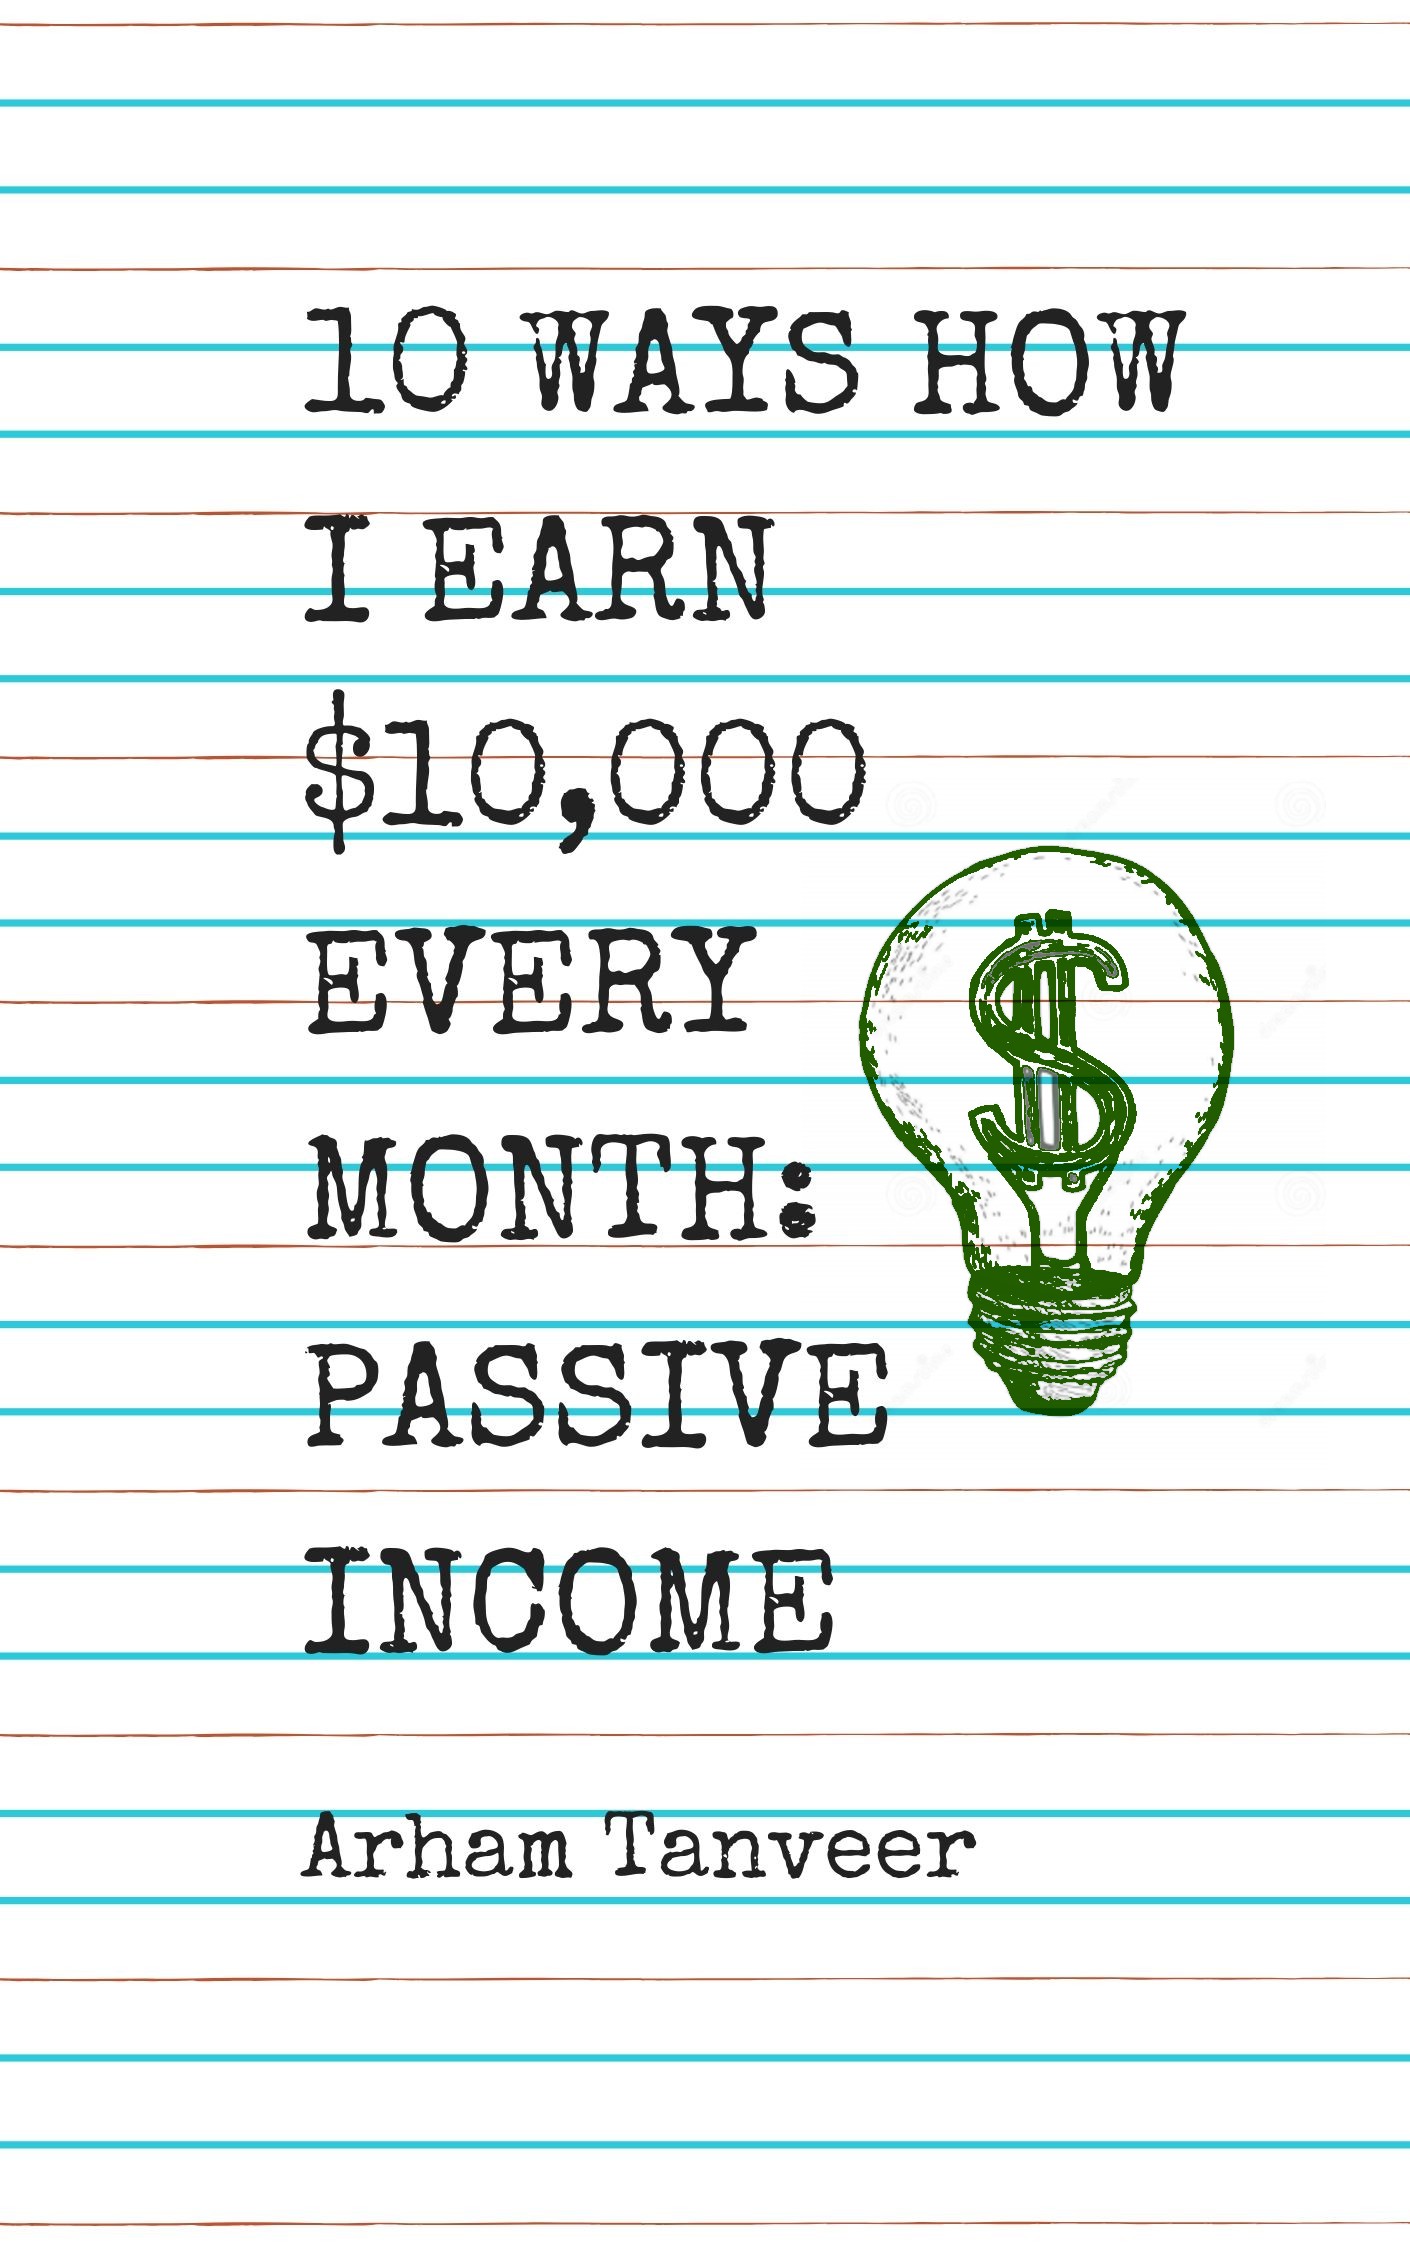 FREE: 10 WAYS HOW I EARN $10,000 EVERY MONTH: PASSIVE INCOME by Arham Tanveer